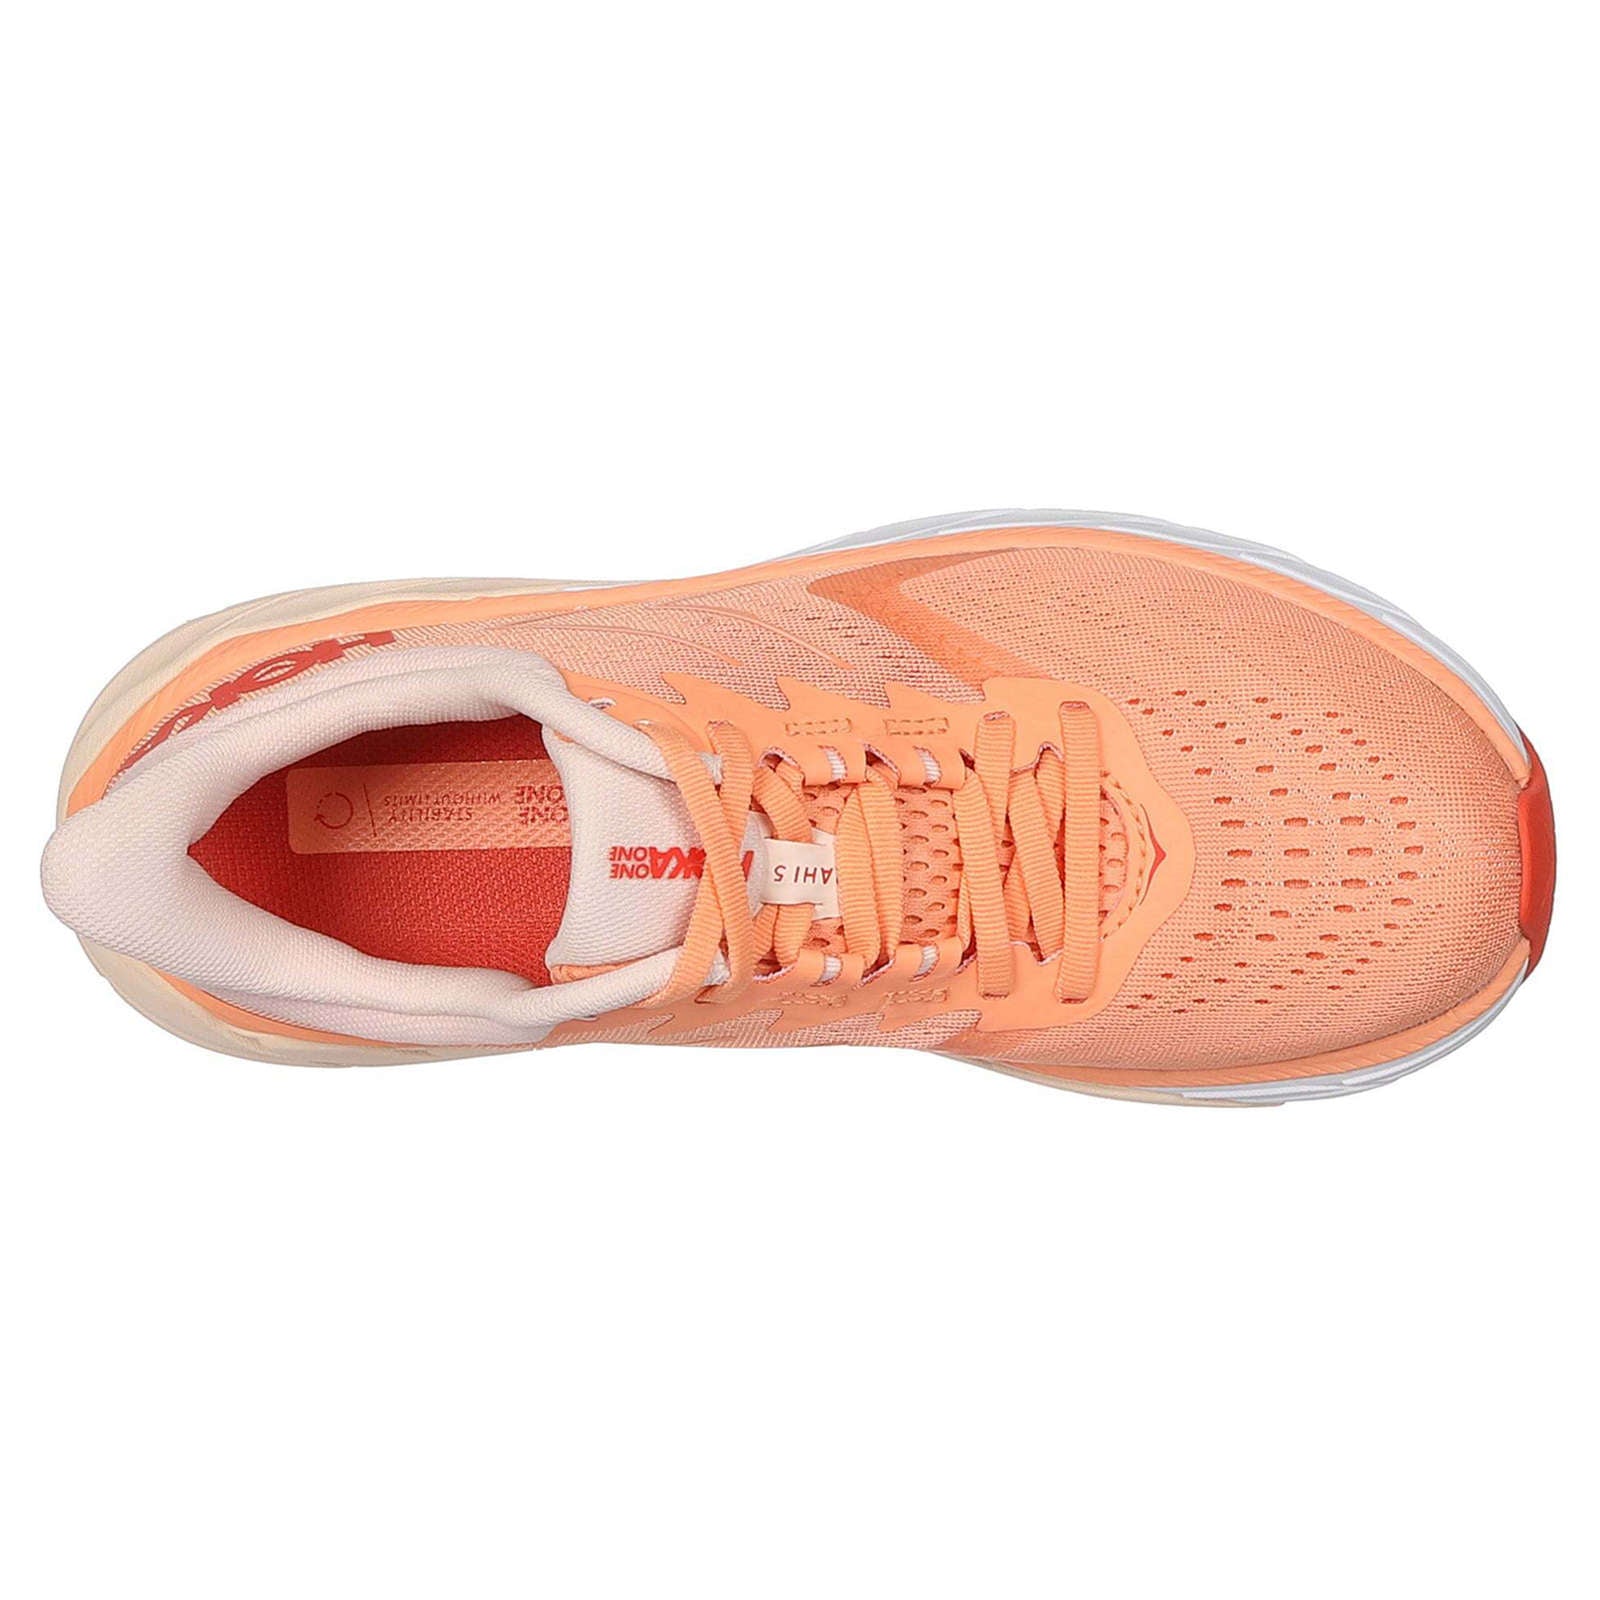 Hoka One One Arahi 5 Synthetic Textile Women's Low-Top Road Running Trainers#color_cantaloupe silver peony